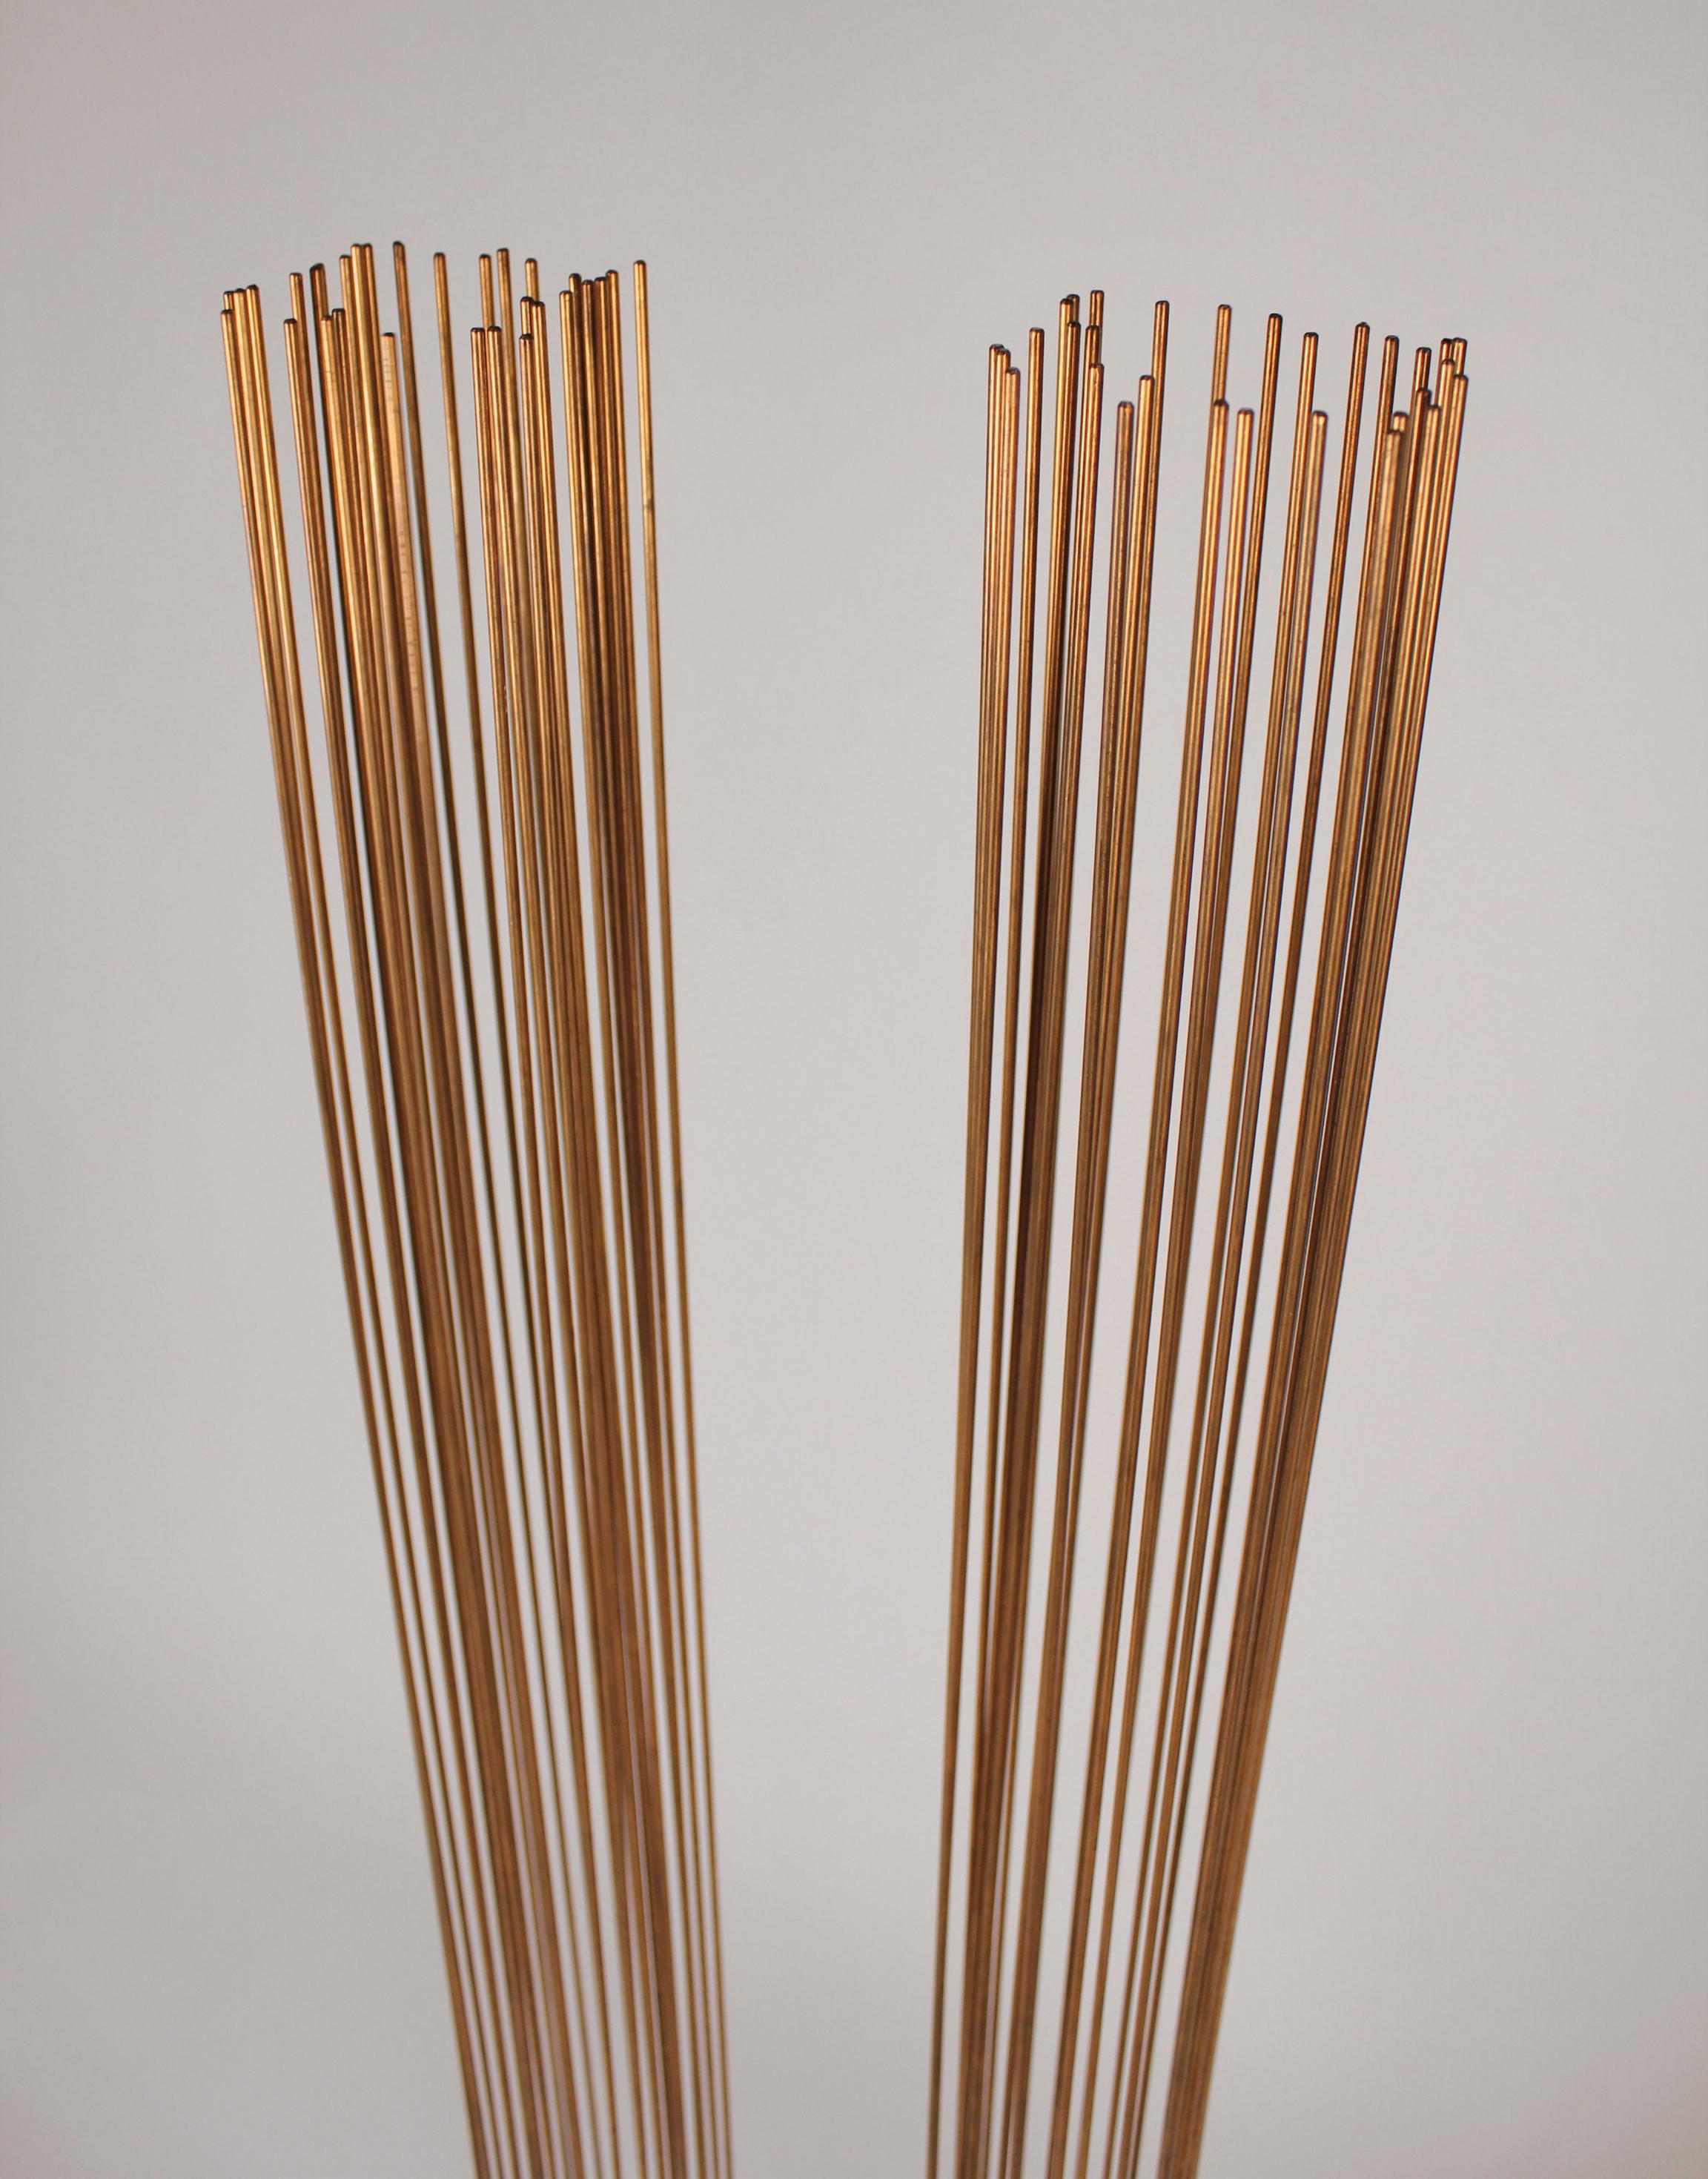 20th Century Brass and Beryllium Copper Sonambinet Sounding Sculpture by Val Bertoia For Sale